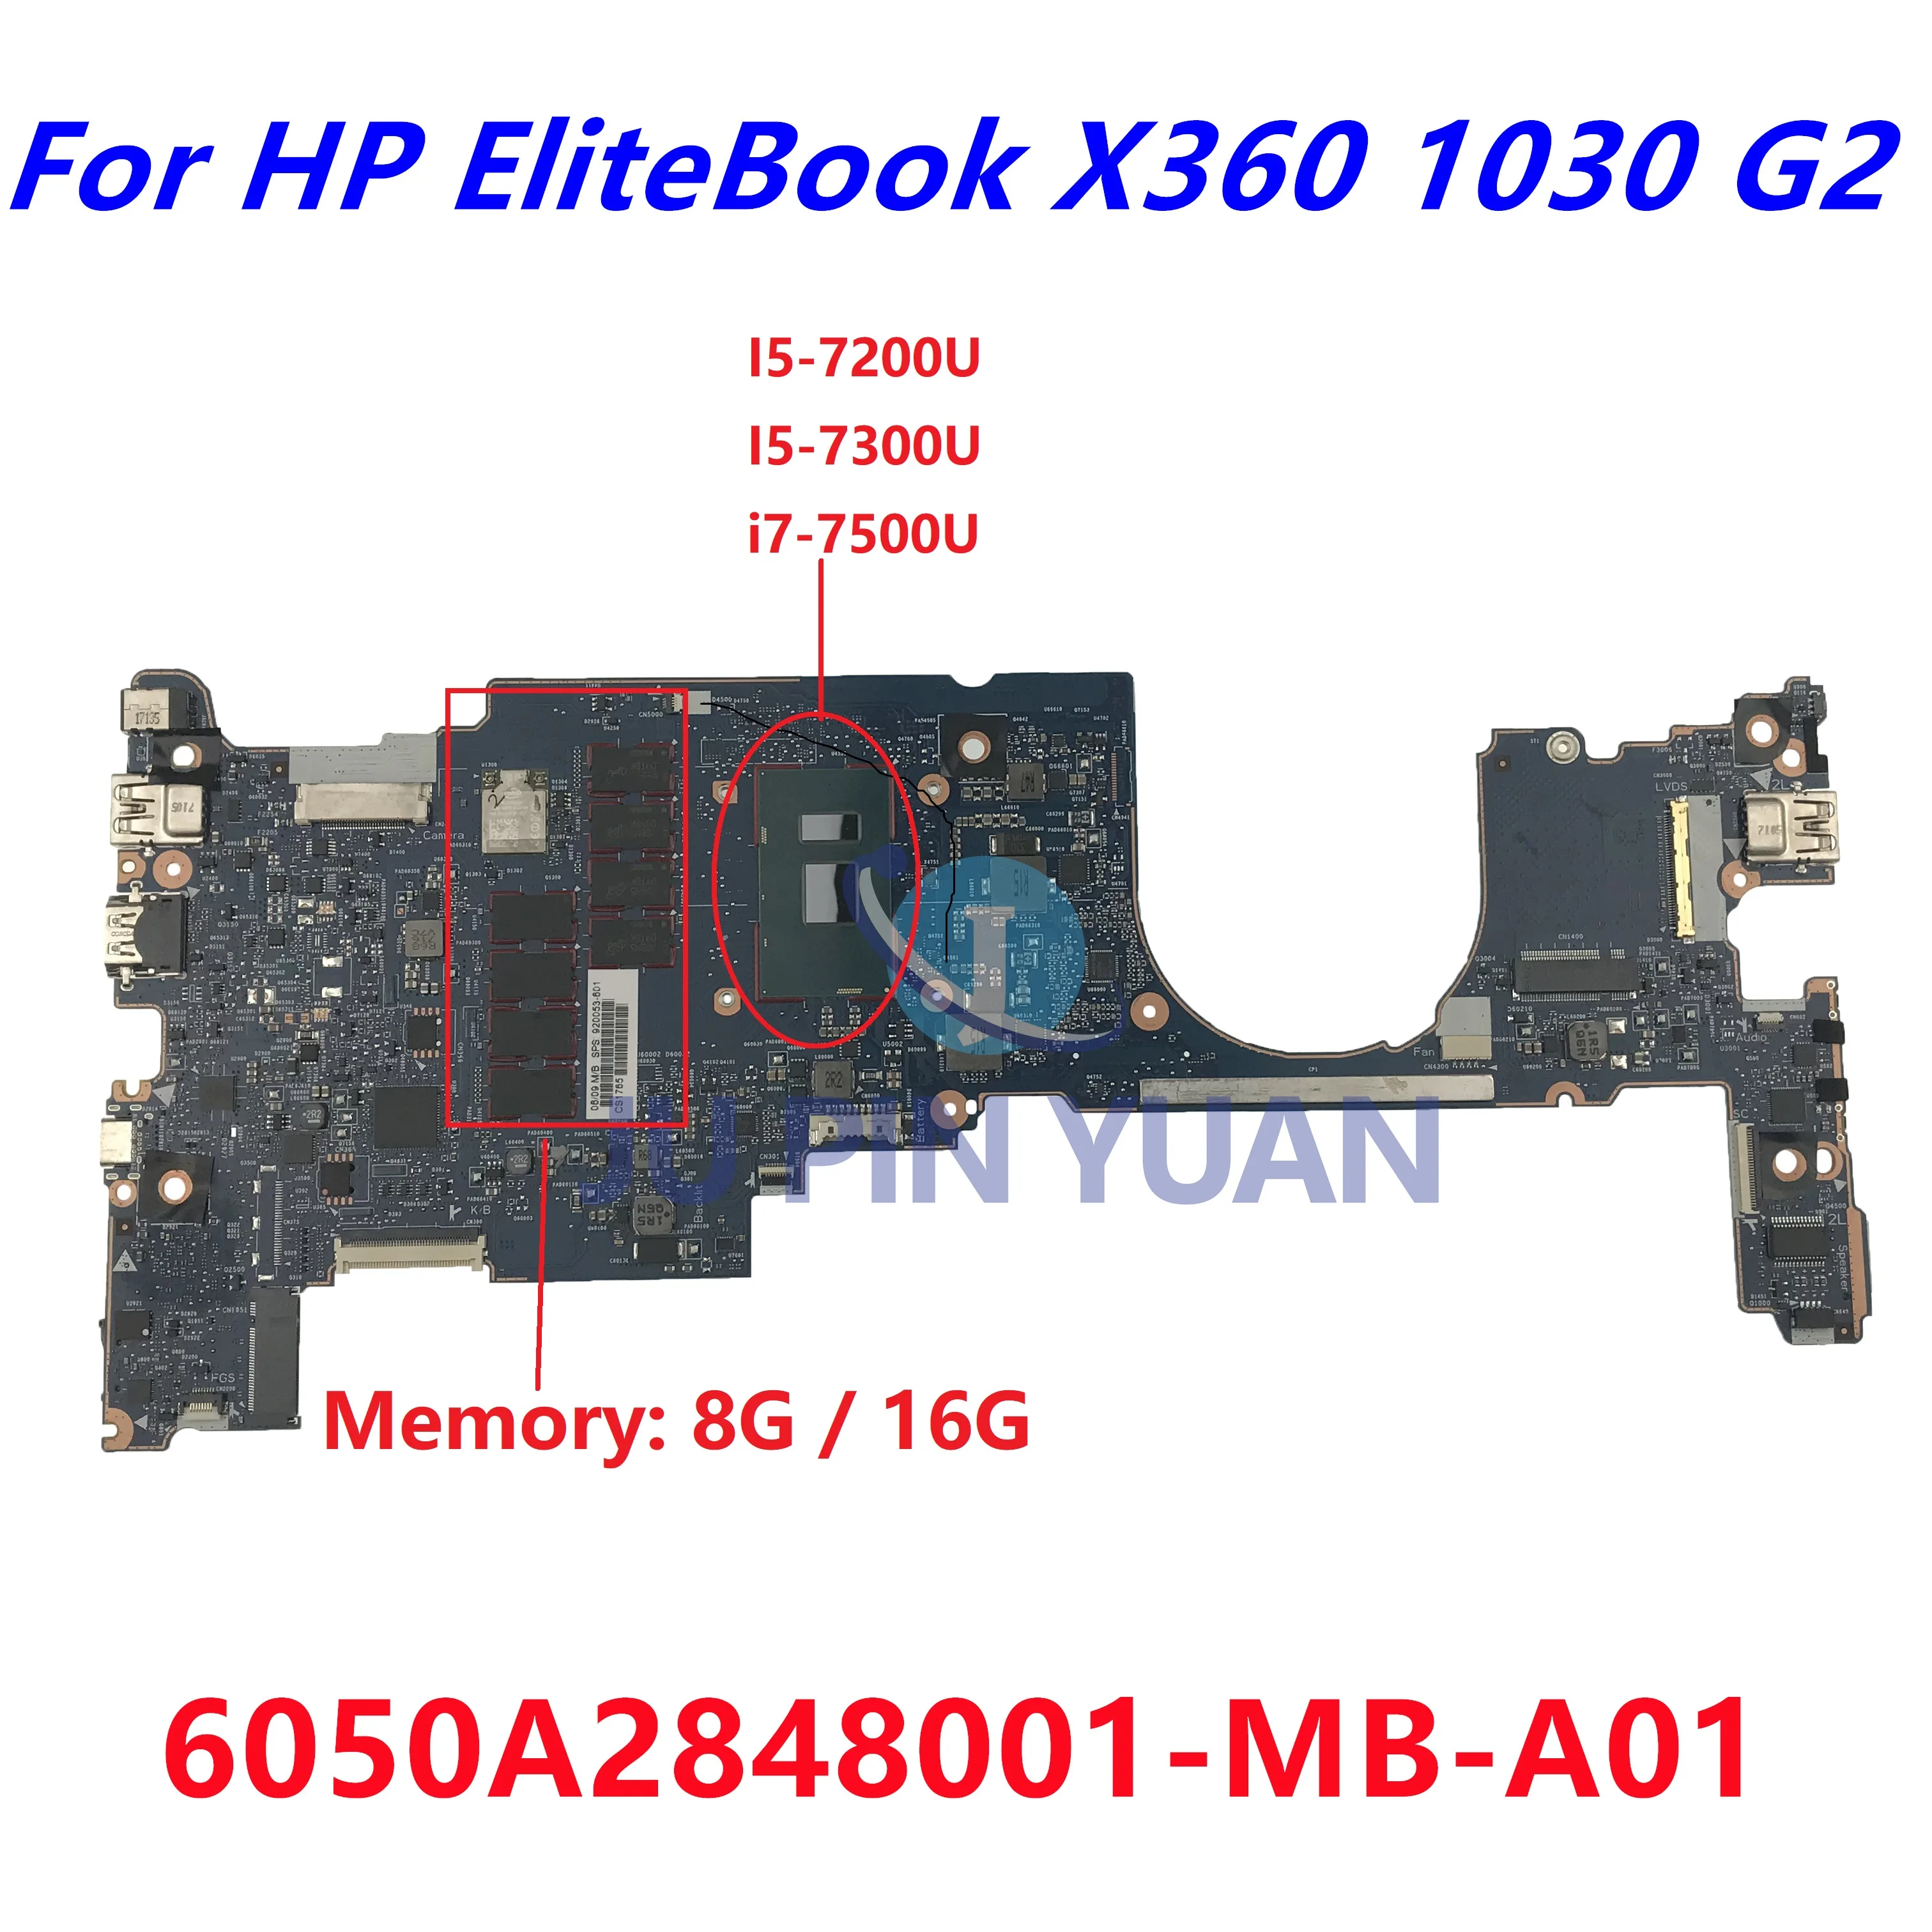 

For HP x360 1030 G2 Laptop motherboard 6050A2848001-MB-A01 920053-601 920053-001 With SR340 I5-7300U 8GB 100% Fully Tested